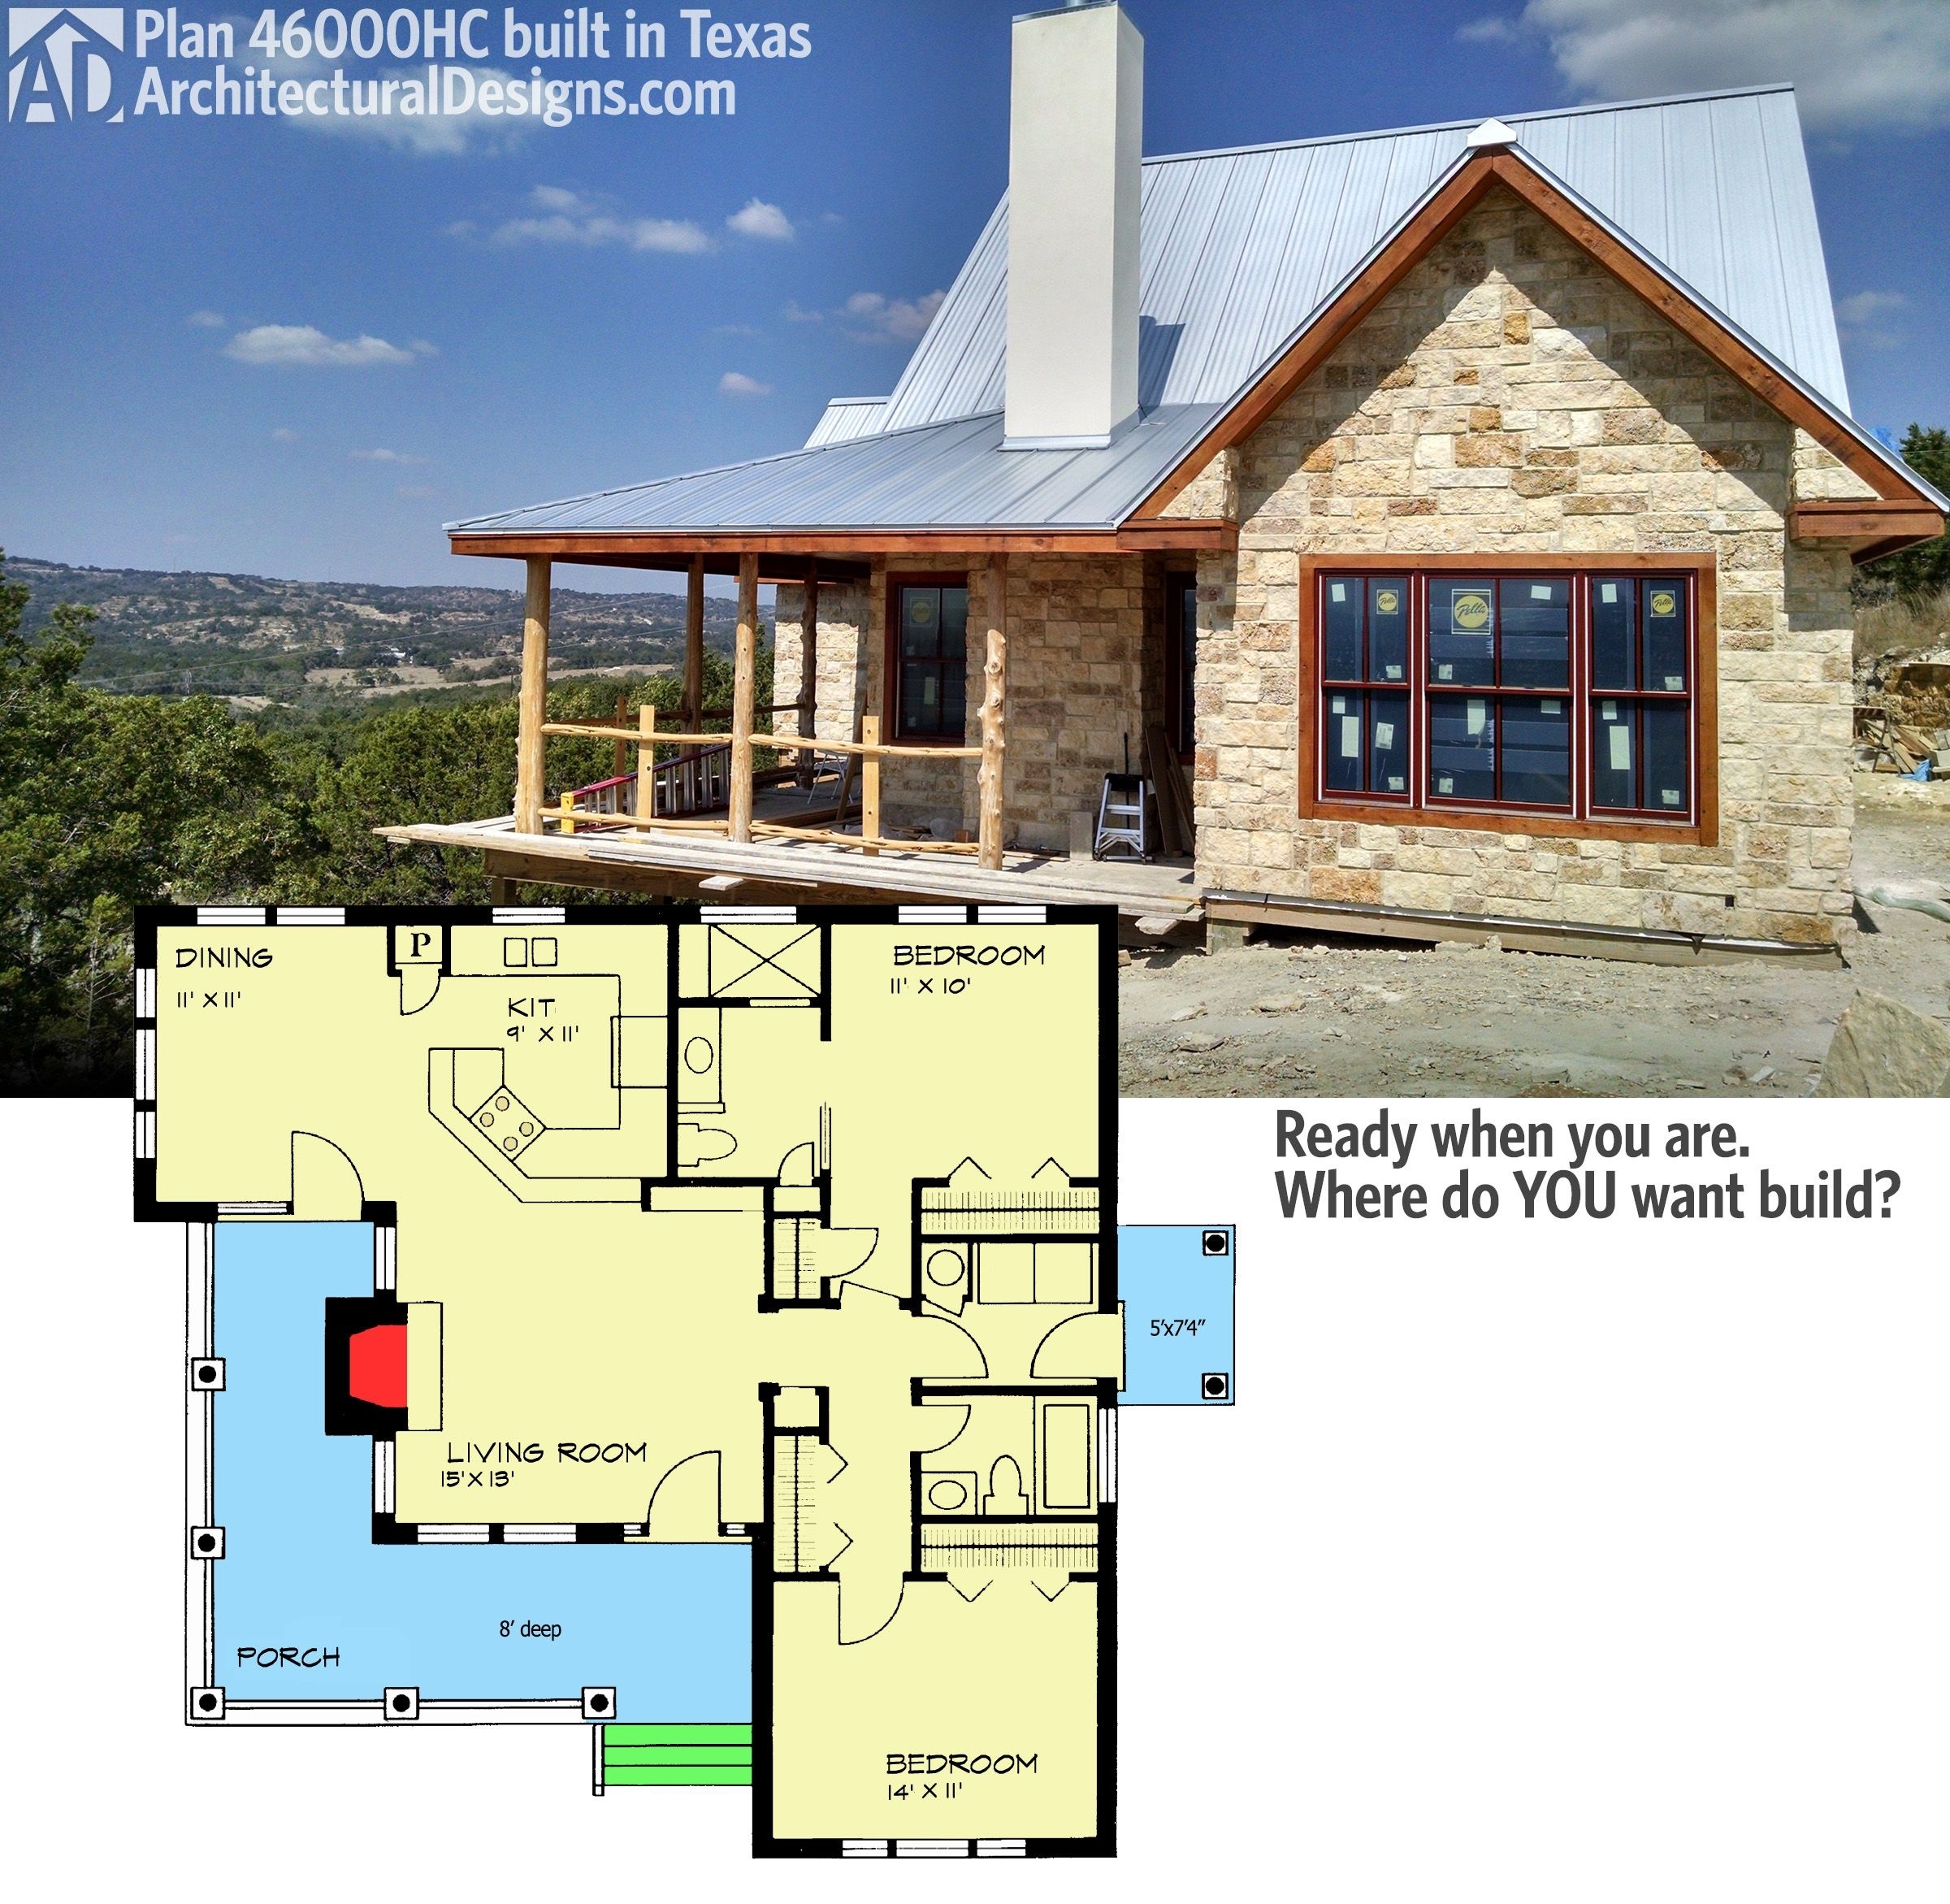 Inspirational hill country cabin plans amazing design home floor design plans ideas throughout outstanding cabin floor plans